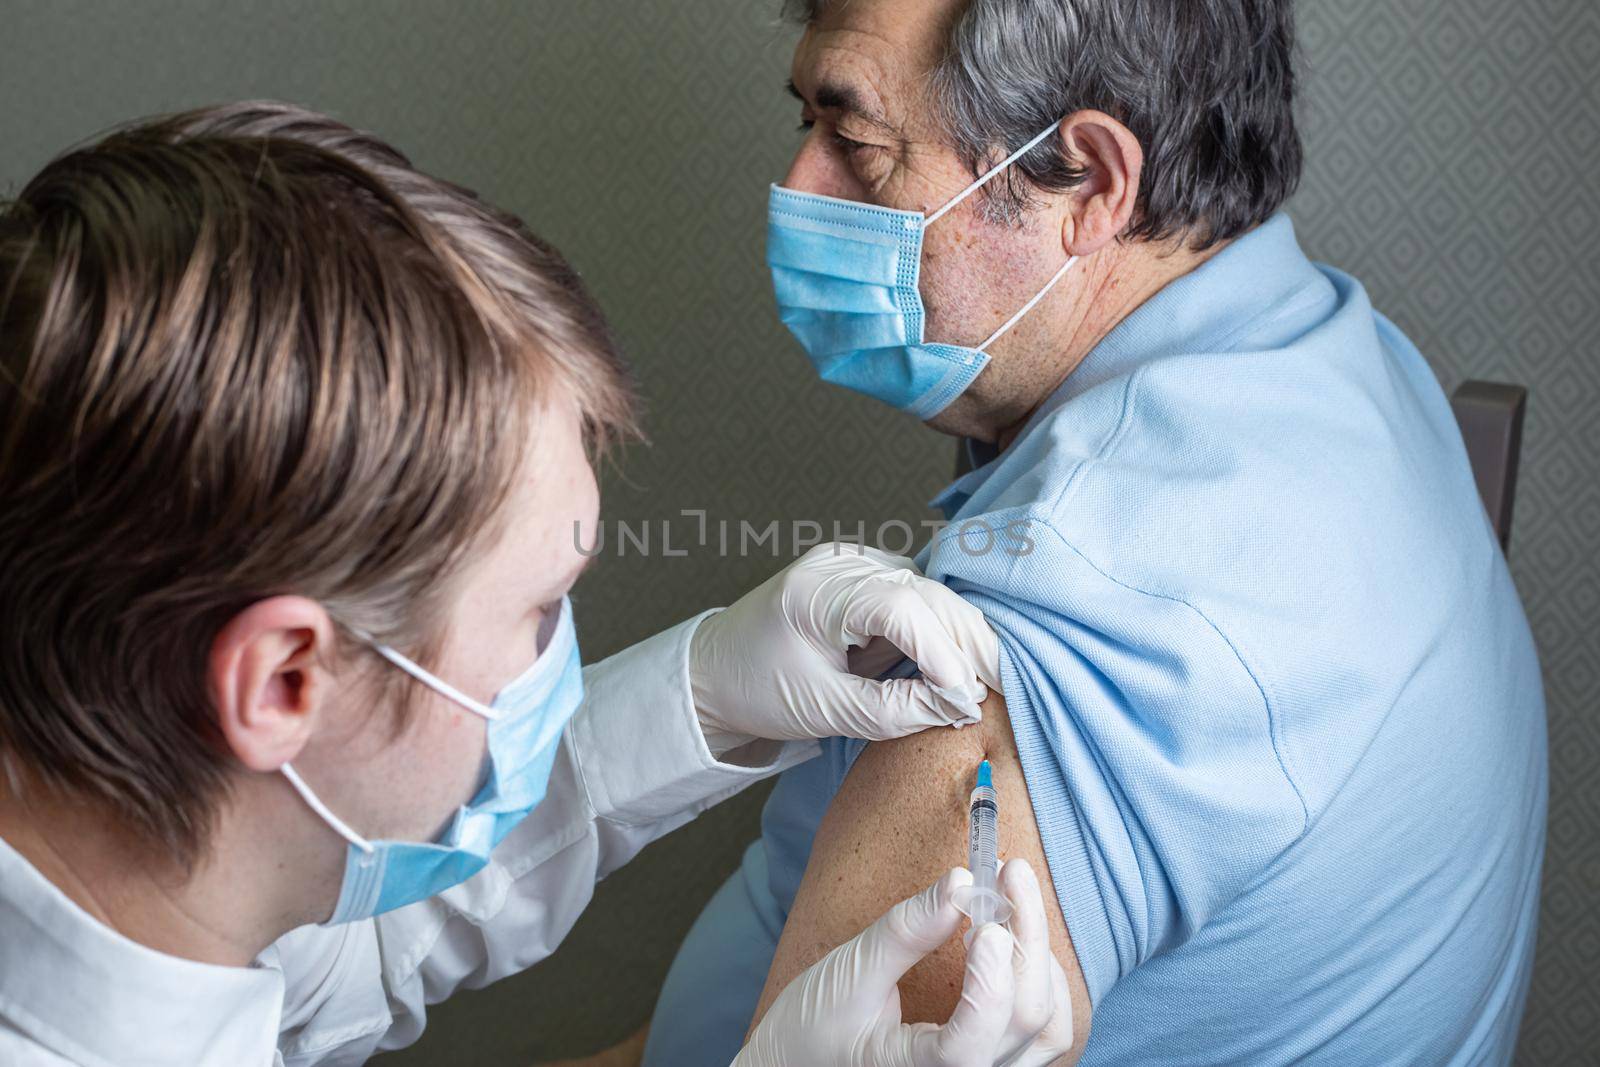 An elderly man of Caucasian appearance in a mask receives a dose of coronavirus vaccination at home, the doctor came to the patient to give a protective injection against the disease